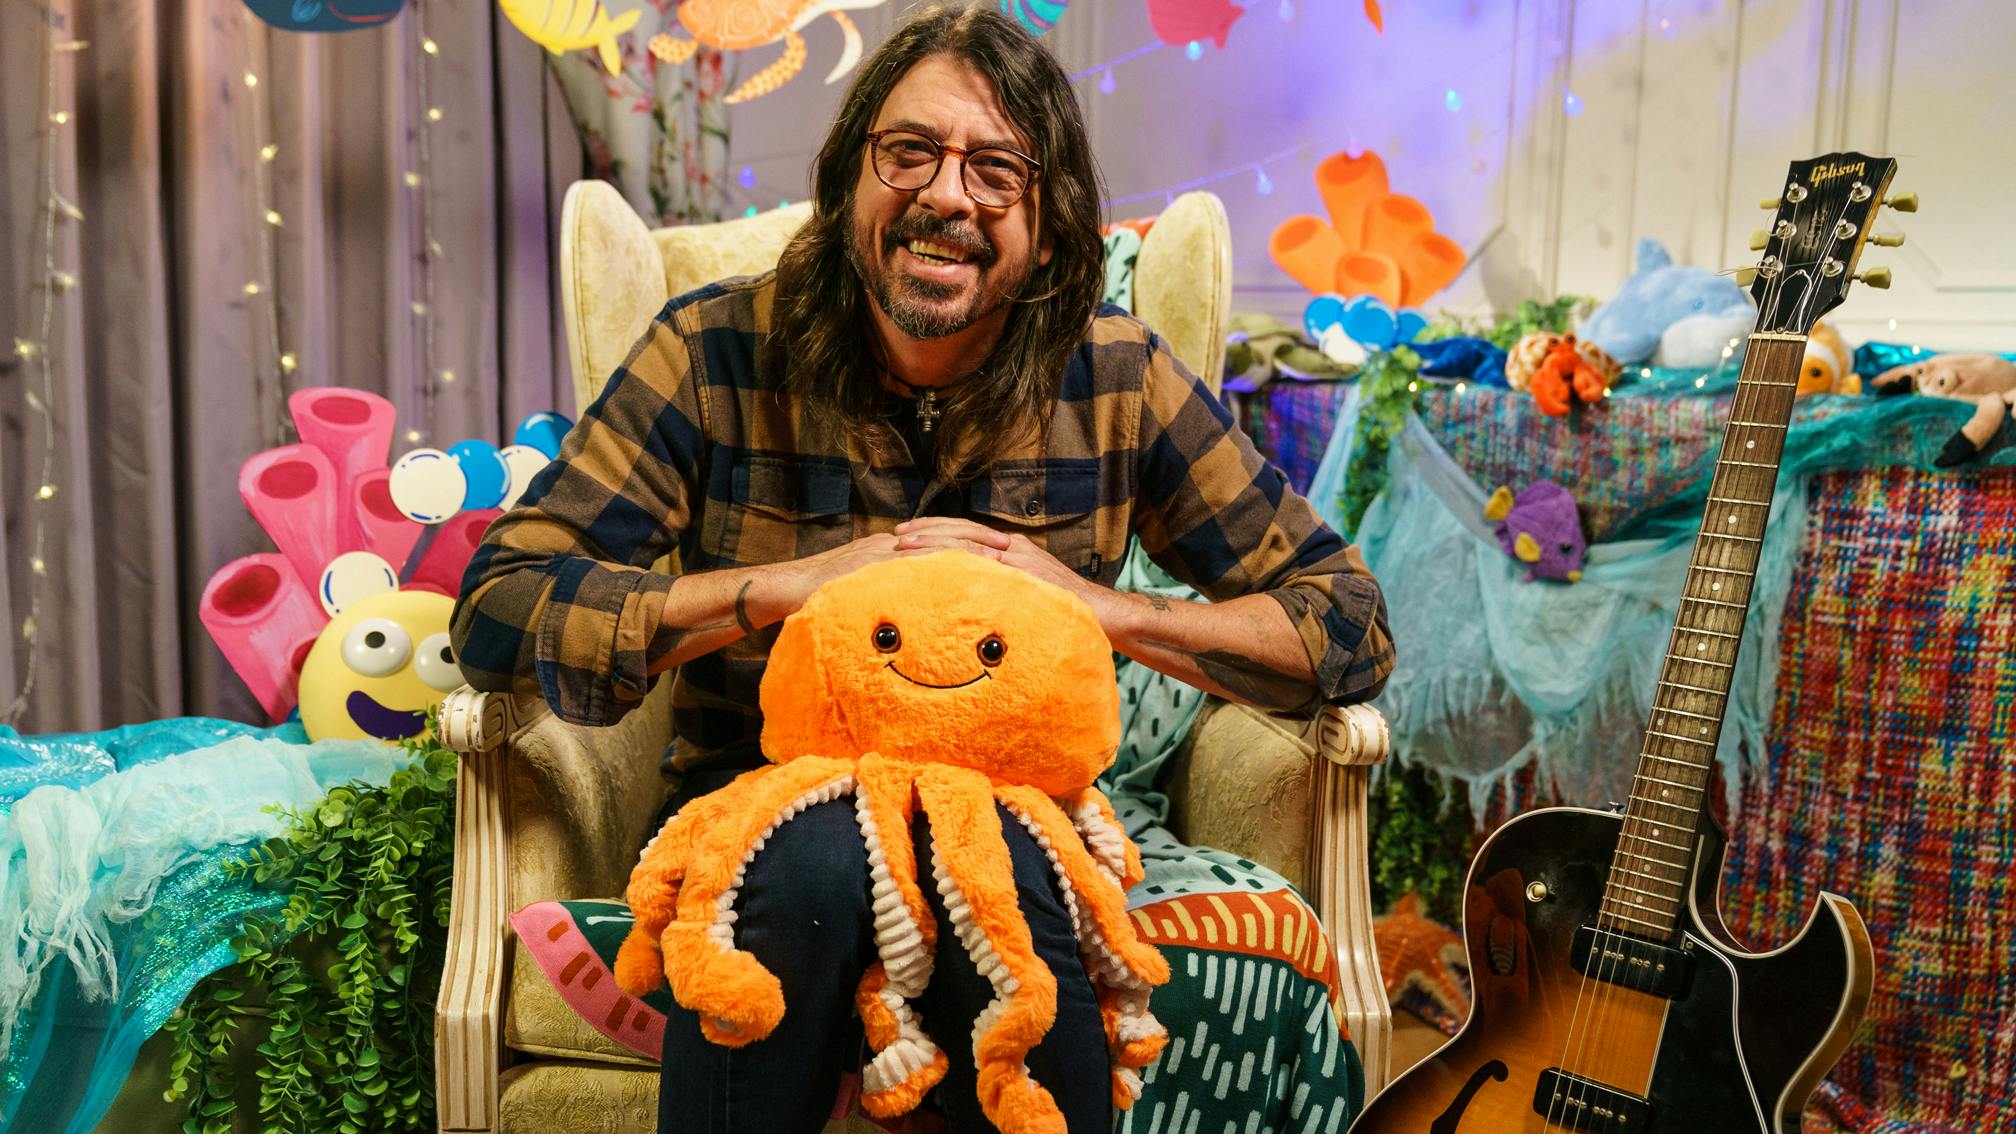 Dave Grohl to read bedtime story for CBeebies